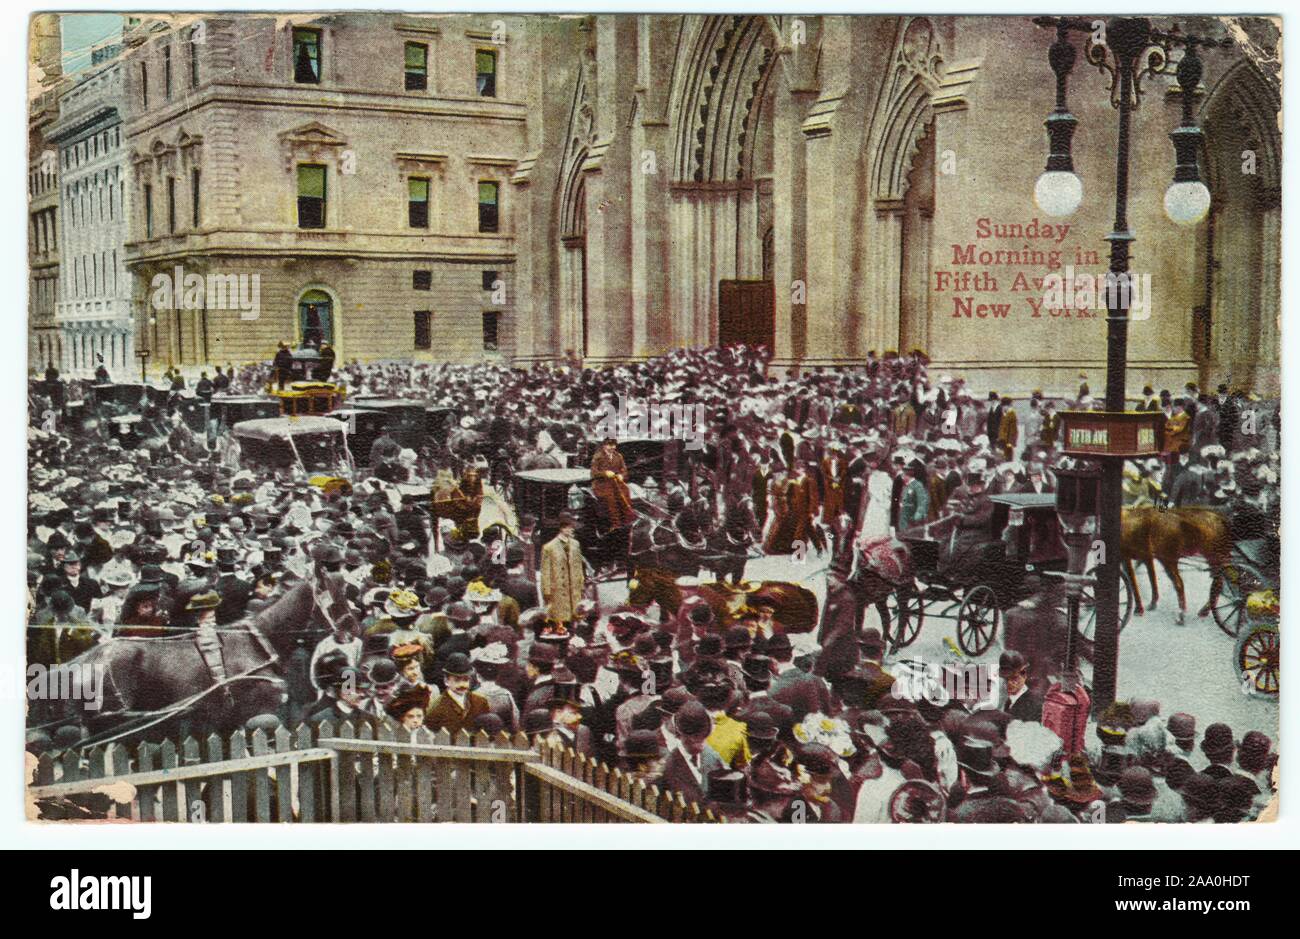 Illustrated postcard of a crowd of people and vehicles on a Sunday morning in Fifth Avenue, New York City, published by Success Postal Card and Co, 1912. From the New York Public Library. () Stock Photo